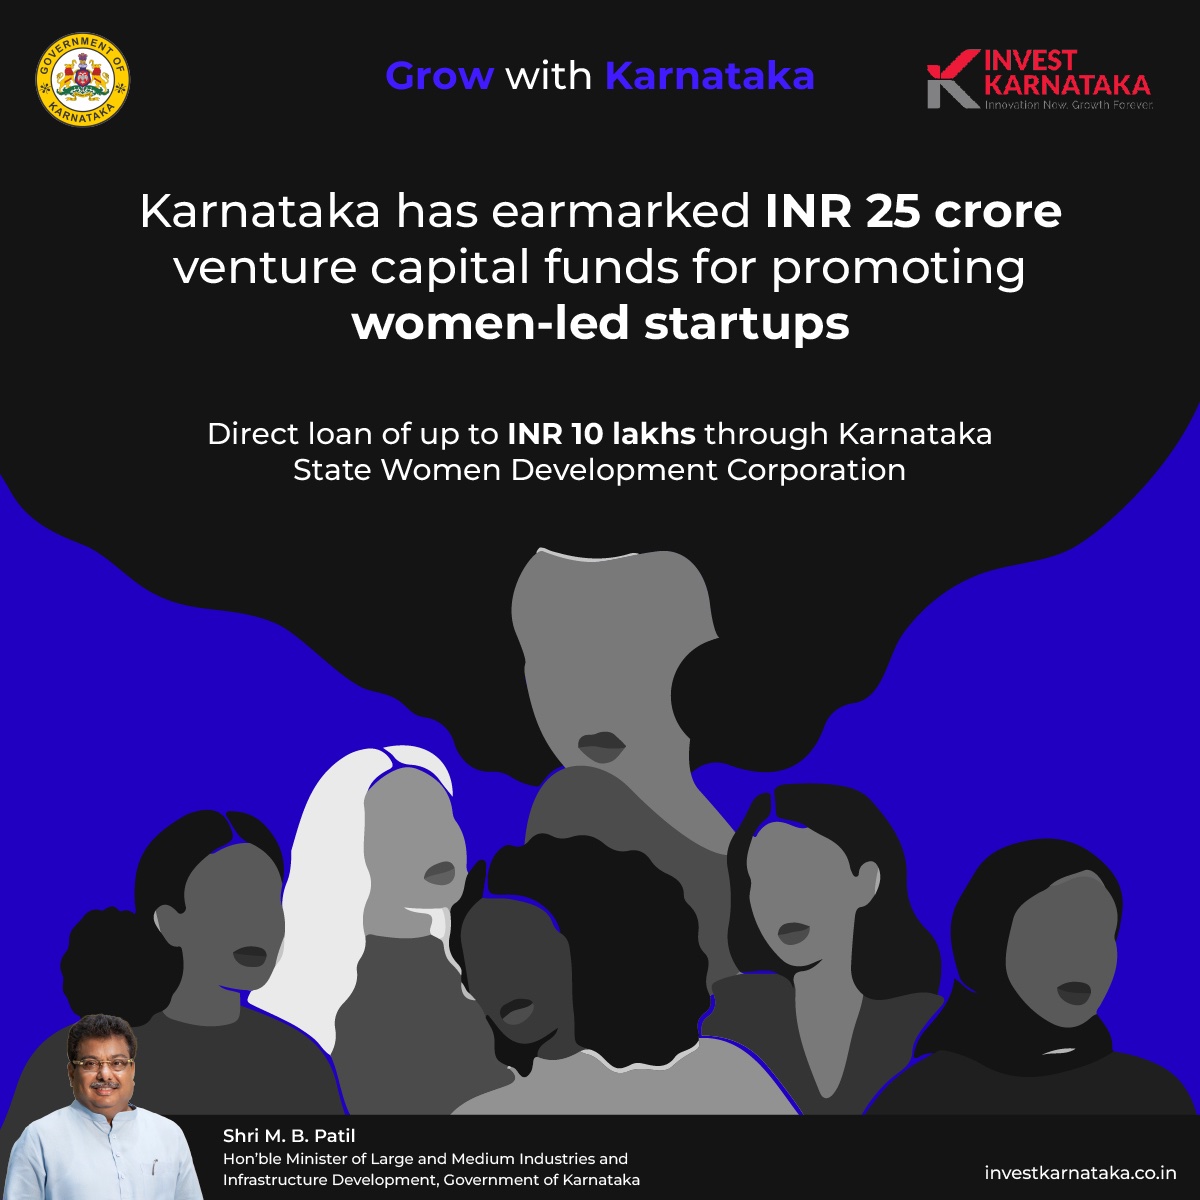 Harnessing the power of #womenentrepreneurs! 👩‍💻 KSWDC's 'Vriddhi' scheme empowers women-led startups identified by KITS 'Elevate' through financial impetus. Investing in #Karnataka's startup ecosystem is investing in women's greater participation in the economy. #InvestKarnataka